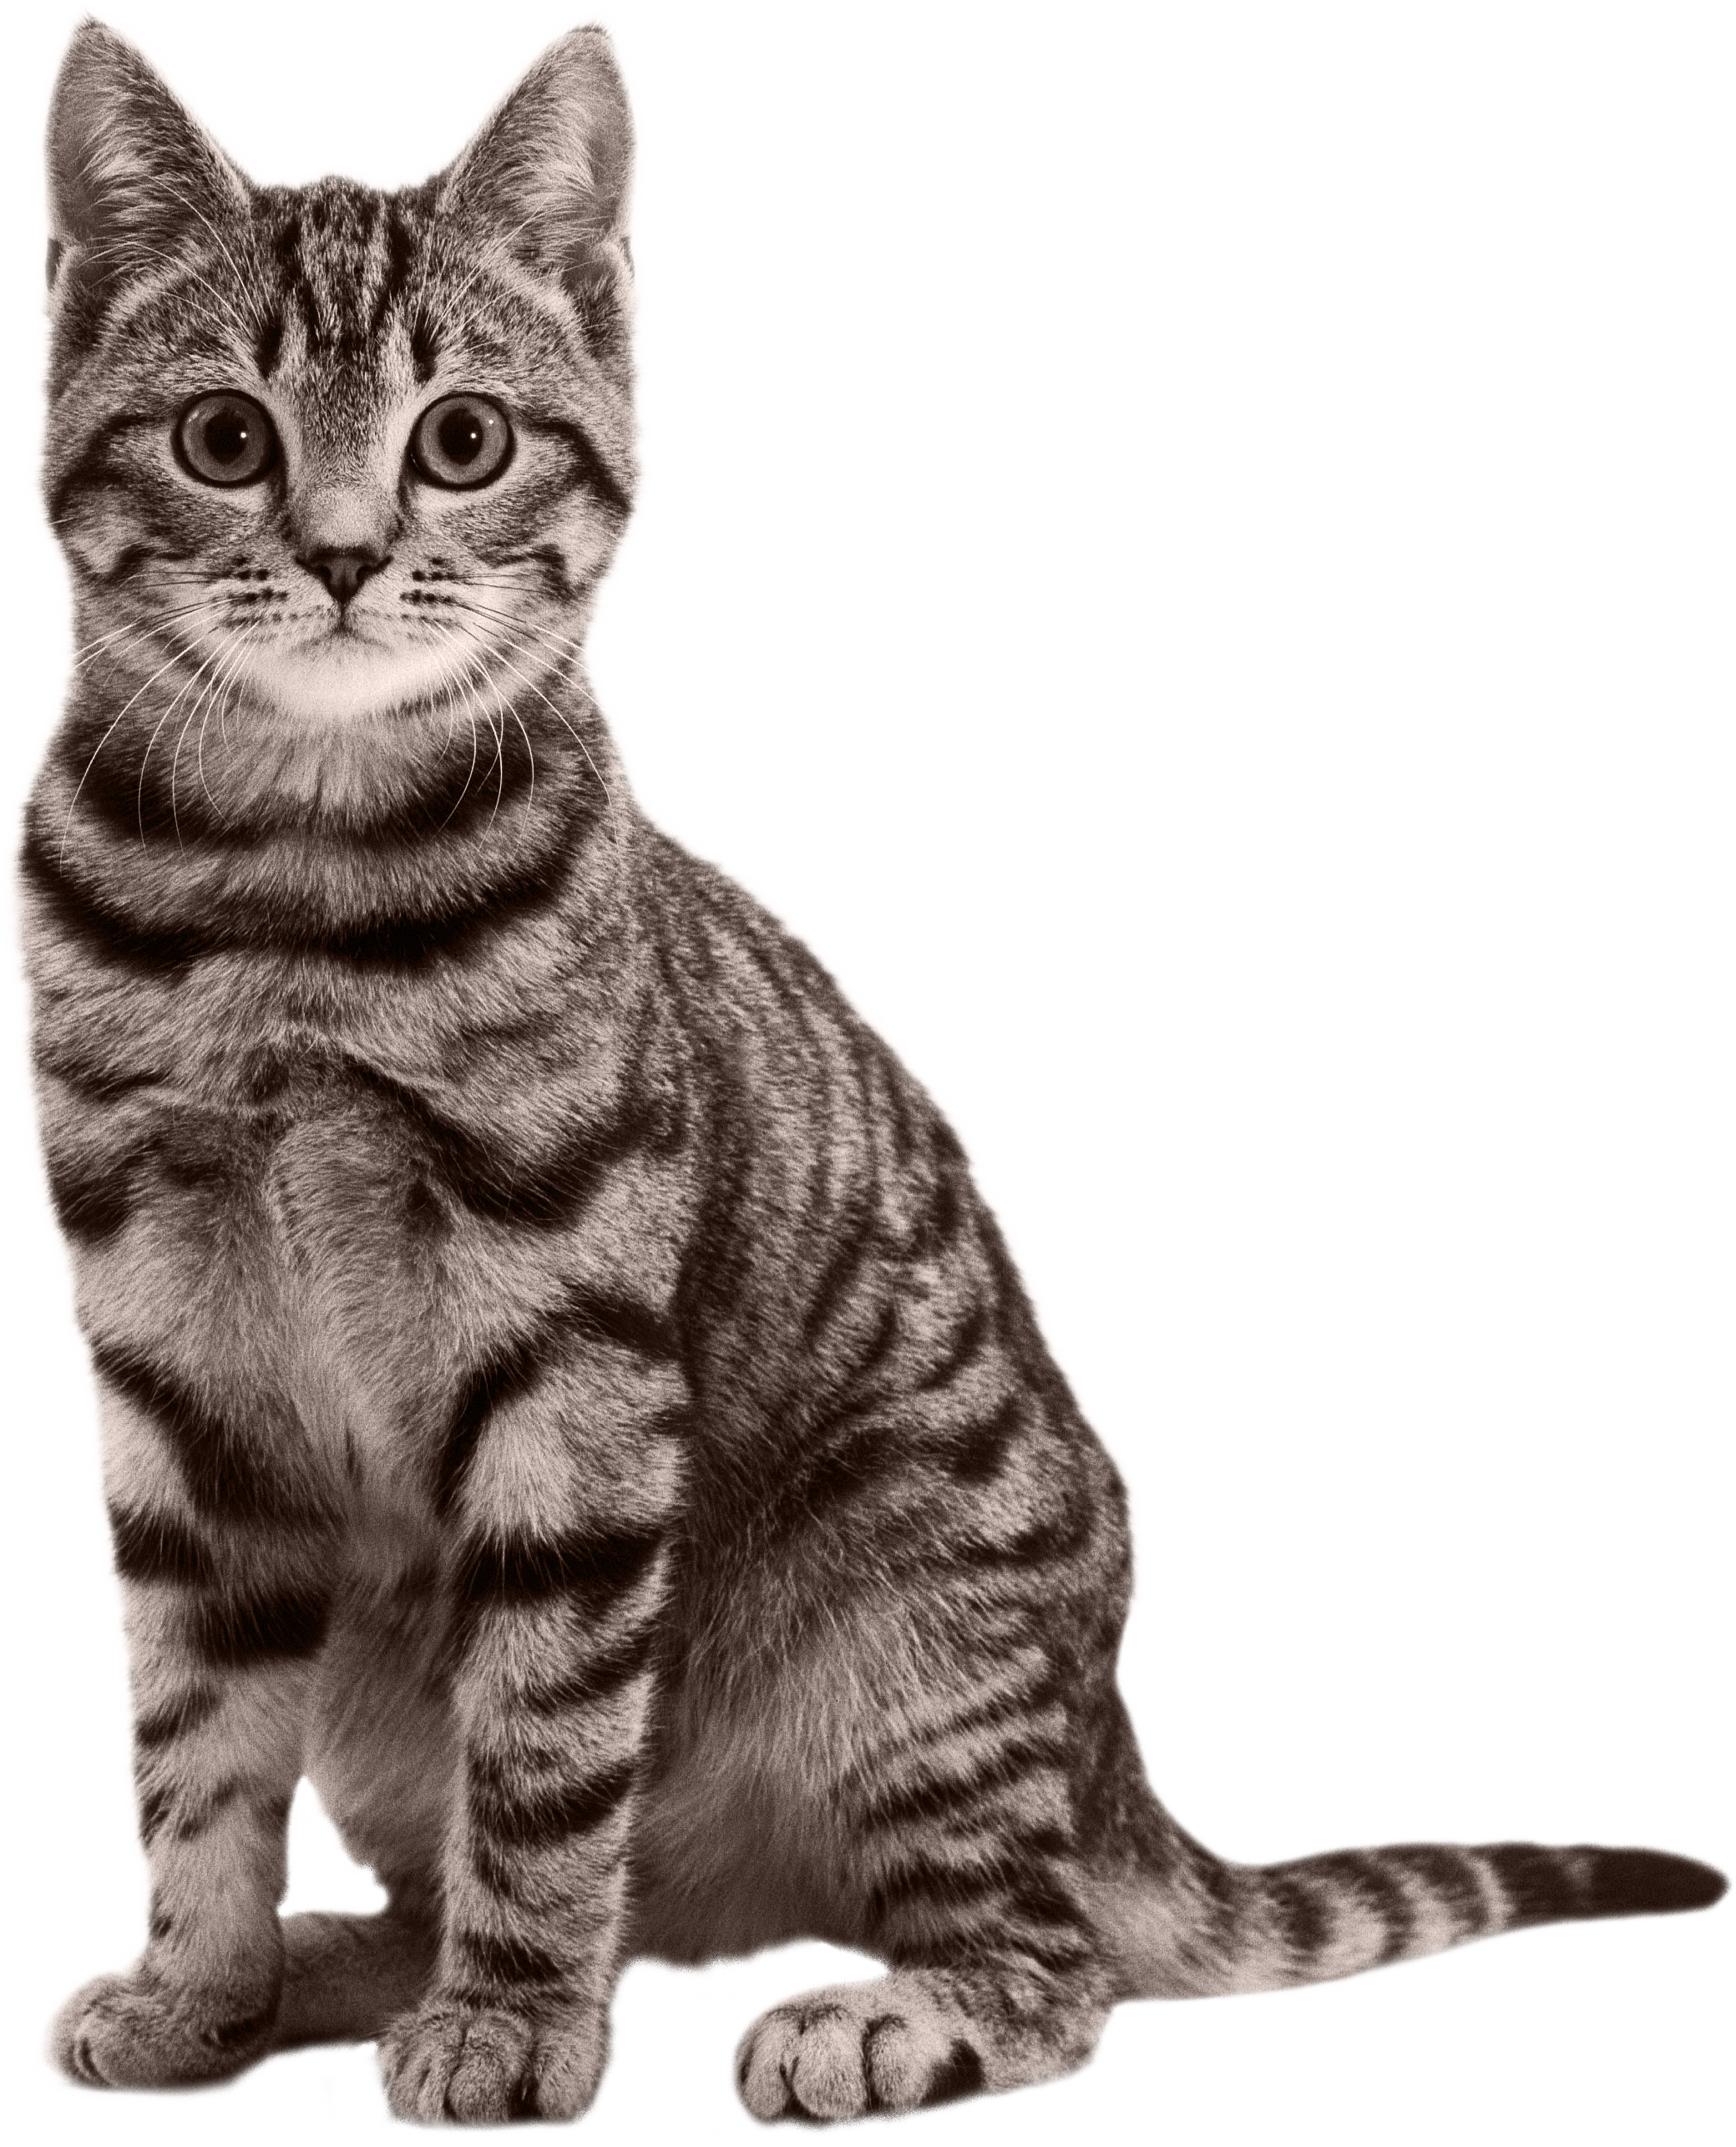 PNG HD Pictures Of Cats - 155925